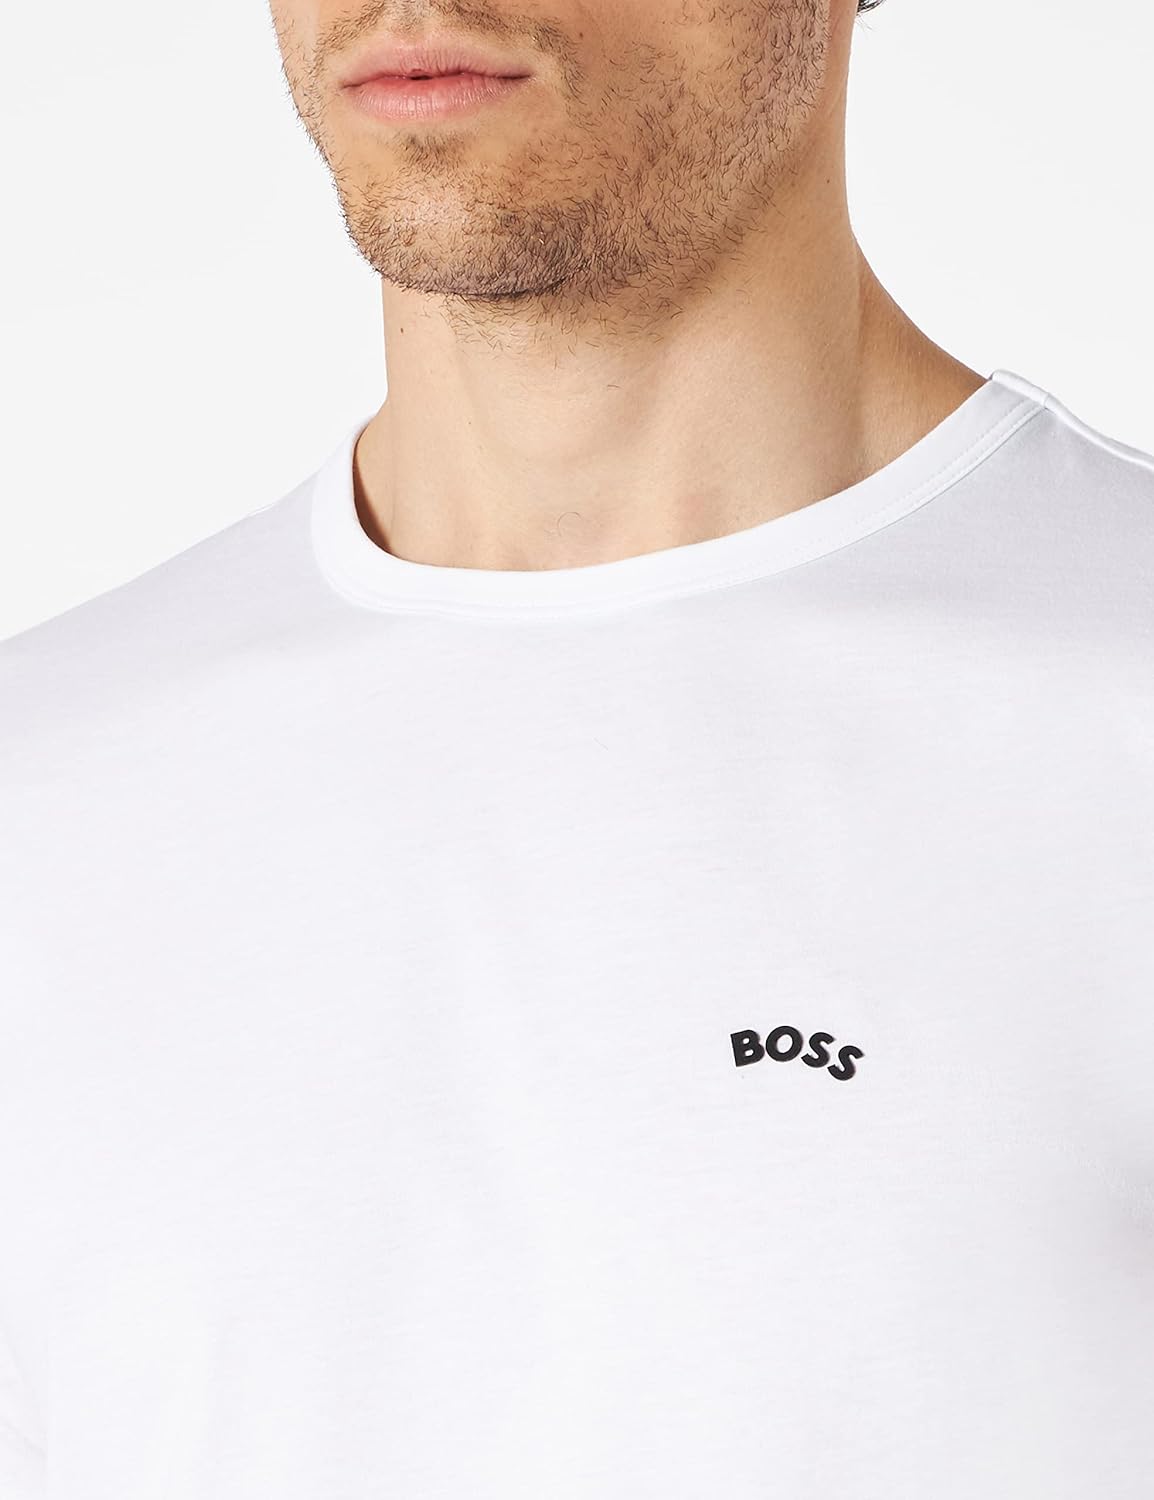 BOSS Men's Tee Curved 10241647 01 T-Shirt (pack of 1)